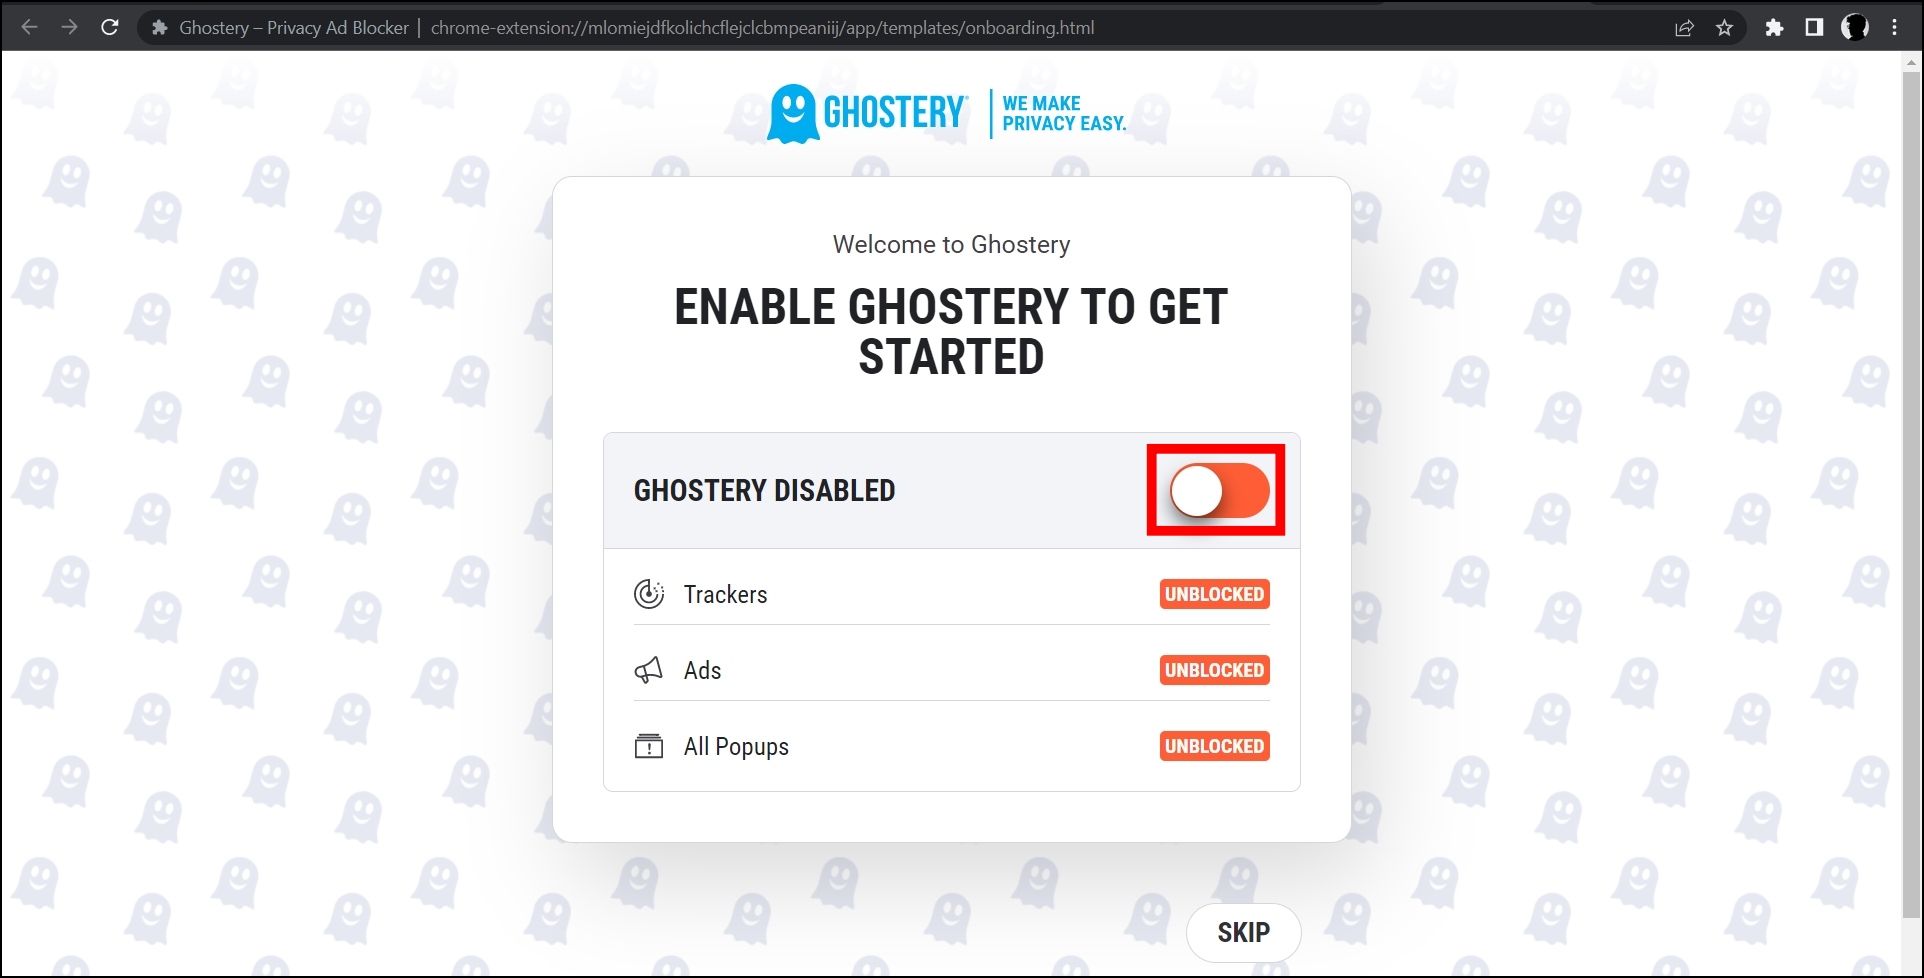 "Ghostery: